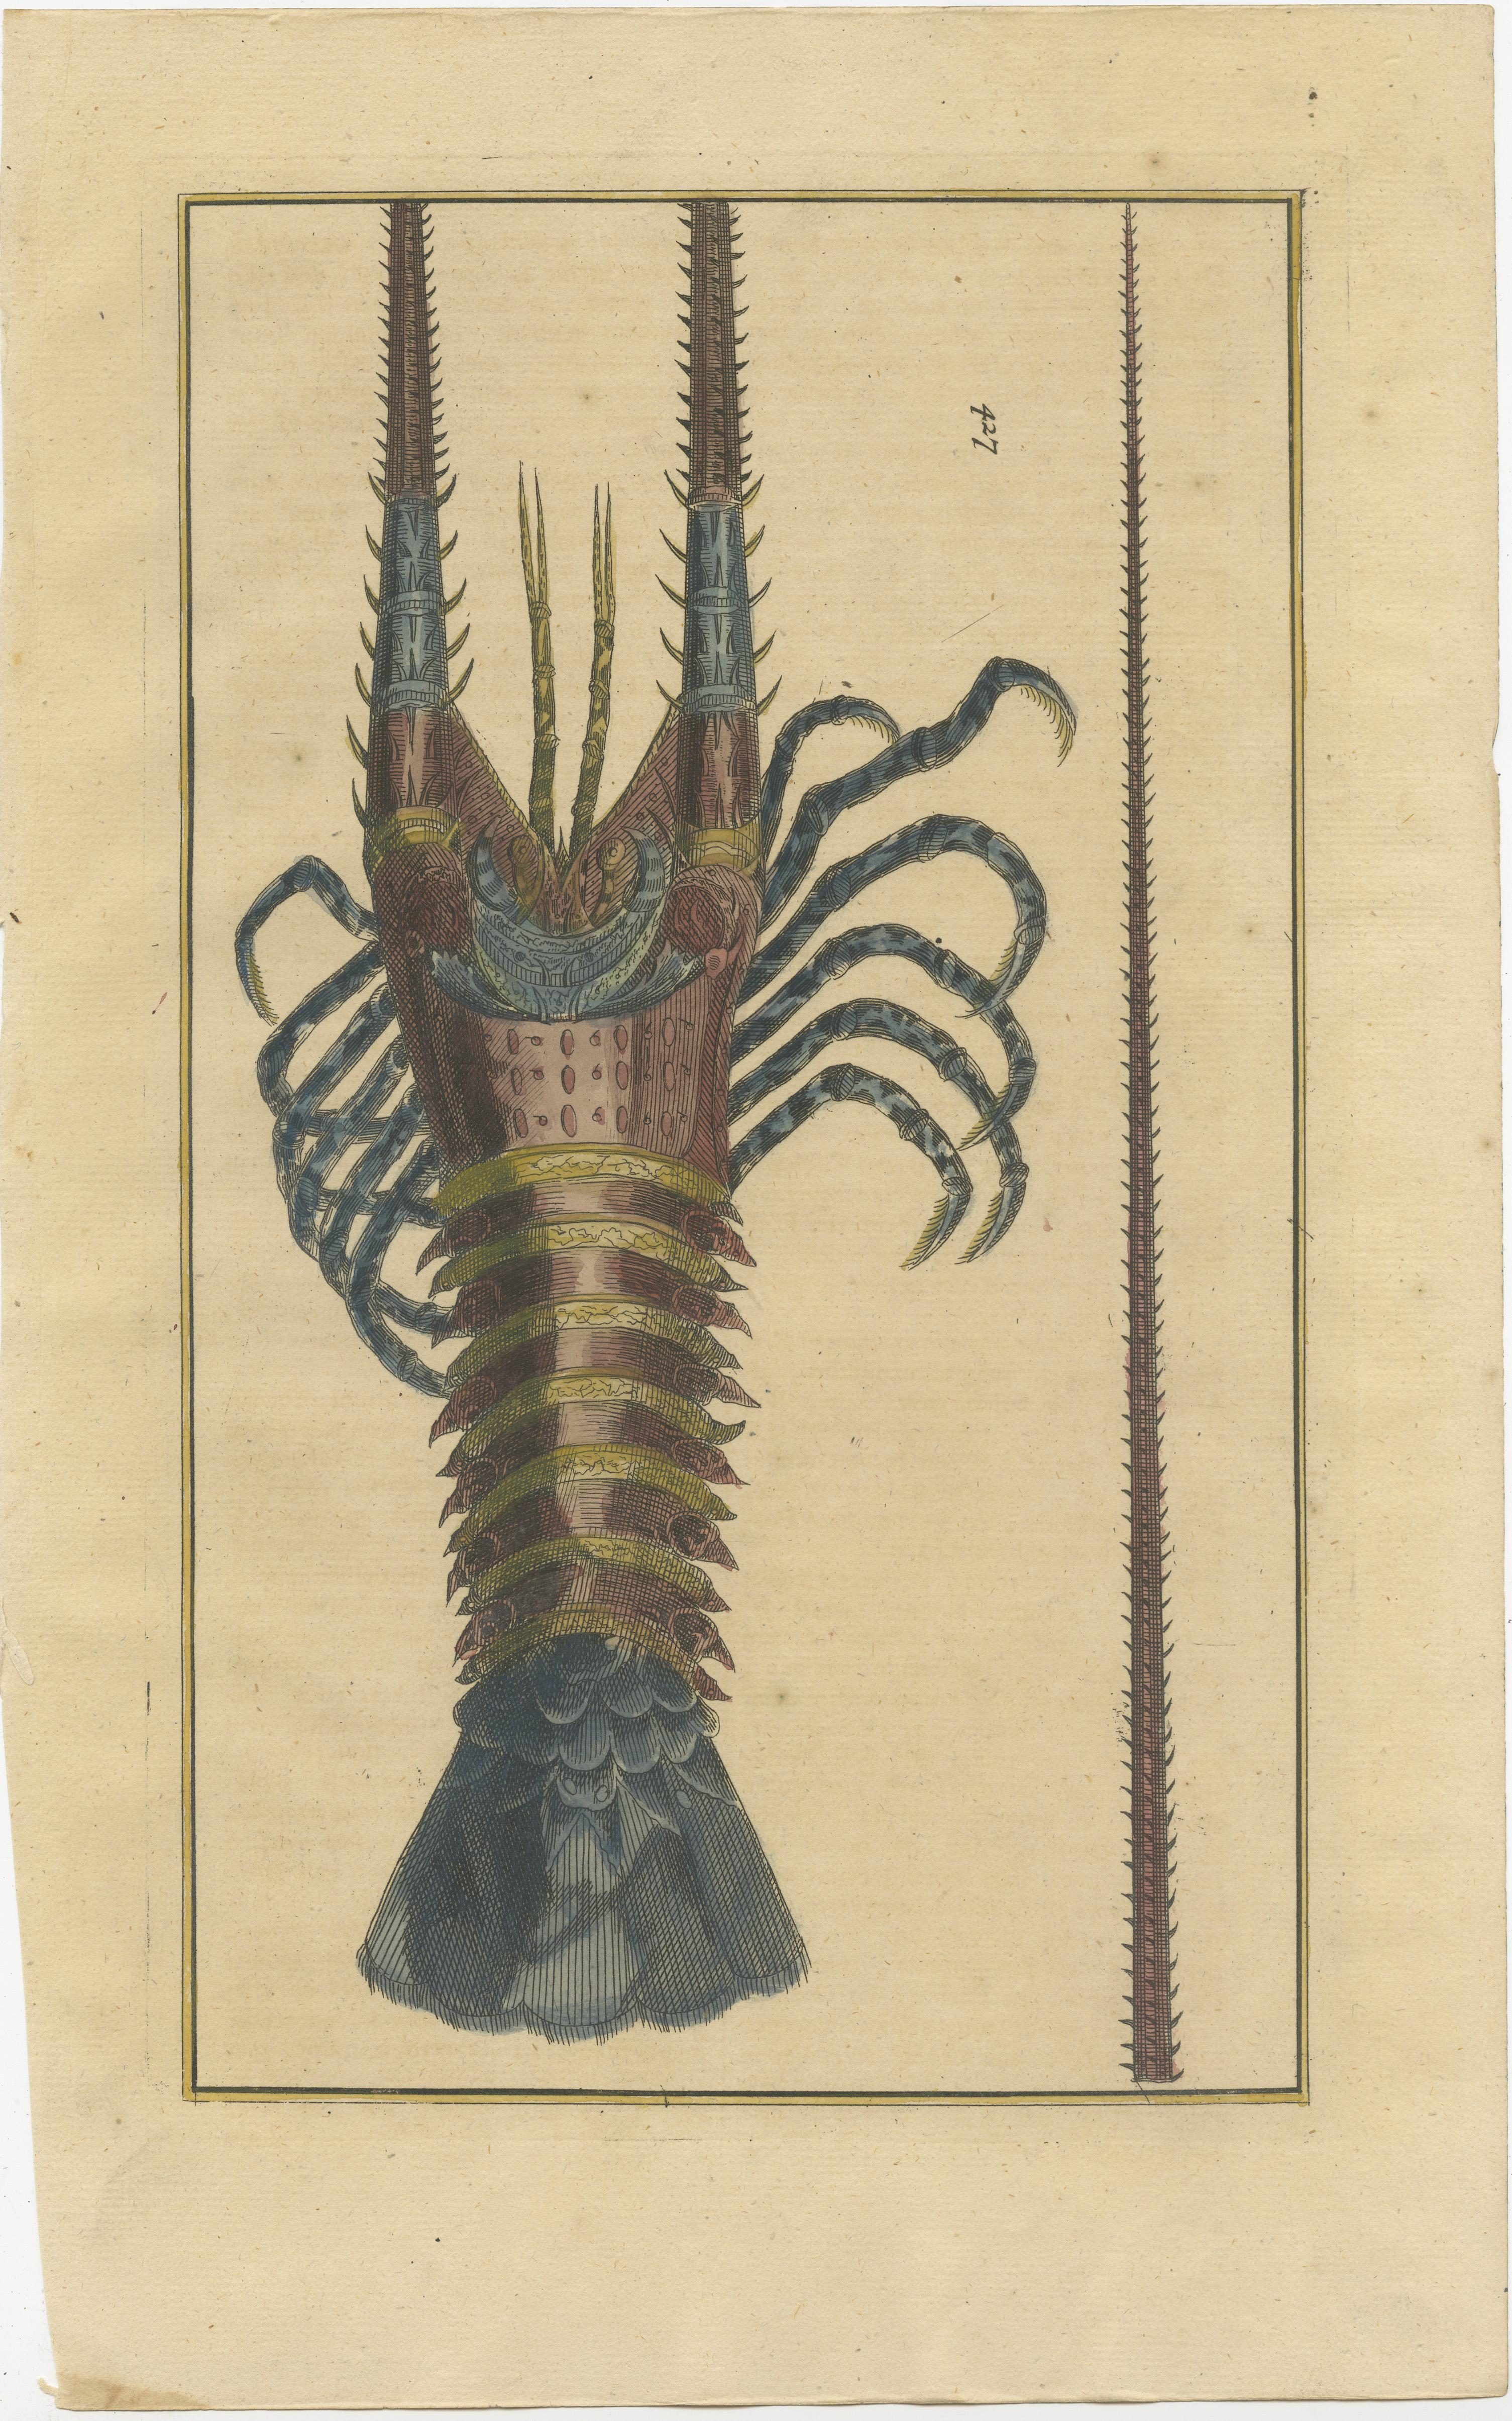 Untitled antique print of a lobster from Indonesia. This print originates from 'Oud en Nieuw Oost-Indiën' by F. Valentijn.

François Valentyn or Valentijn (17 April 1666 – 6 August 1727) was a Dutch Calvinist minister, naturalist and author whose